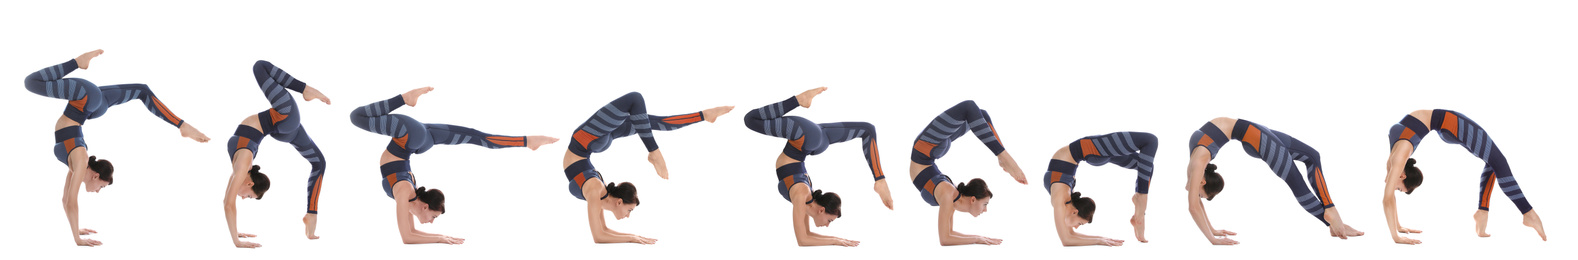 Image of Collage of professional young acrobat exercising on white background. Banner design